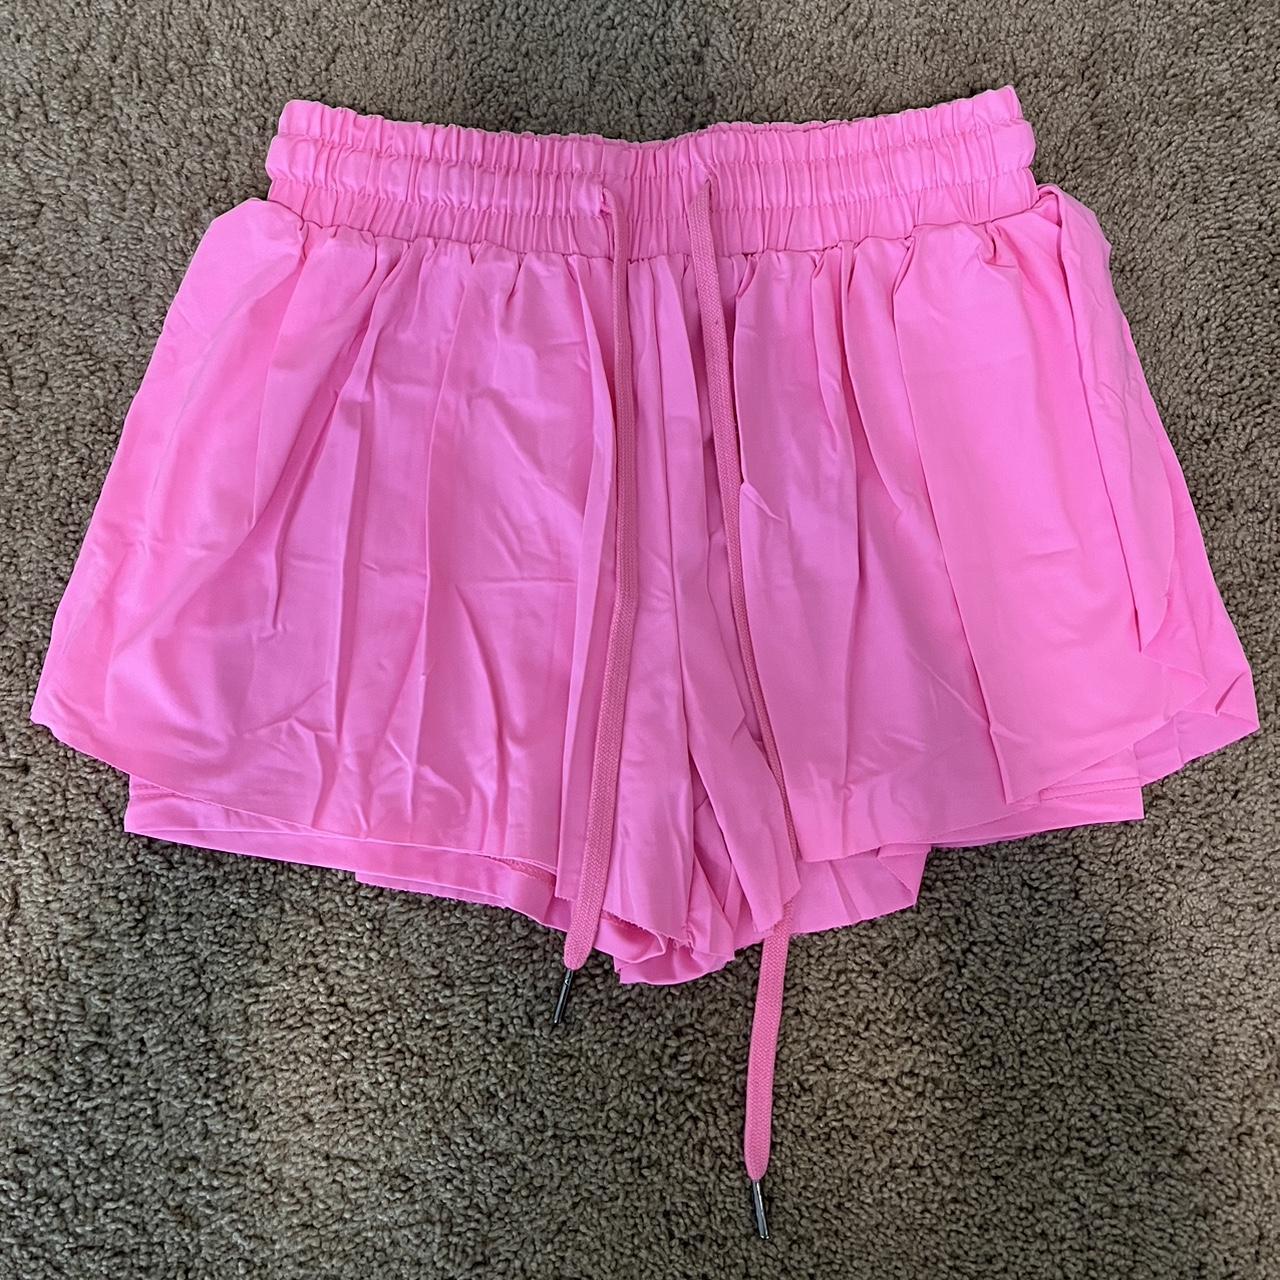 Women's Totally Hot Pink Training Shorts